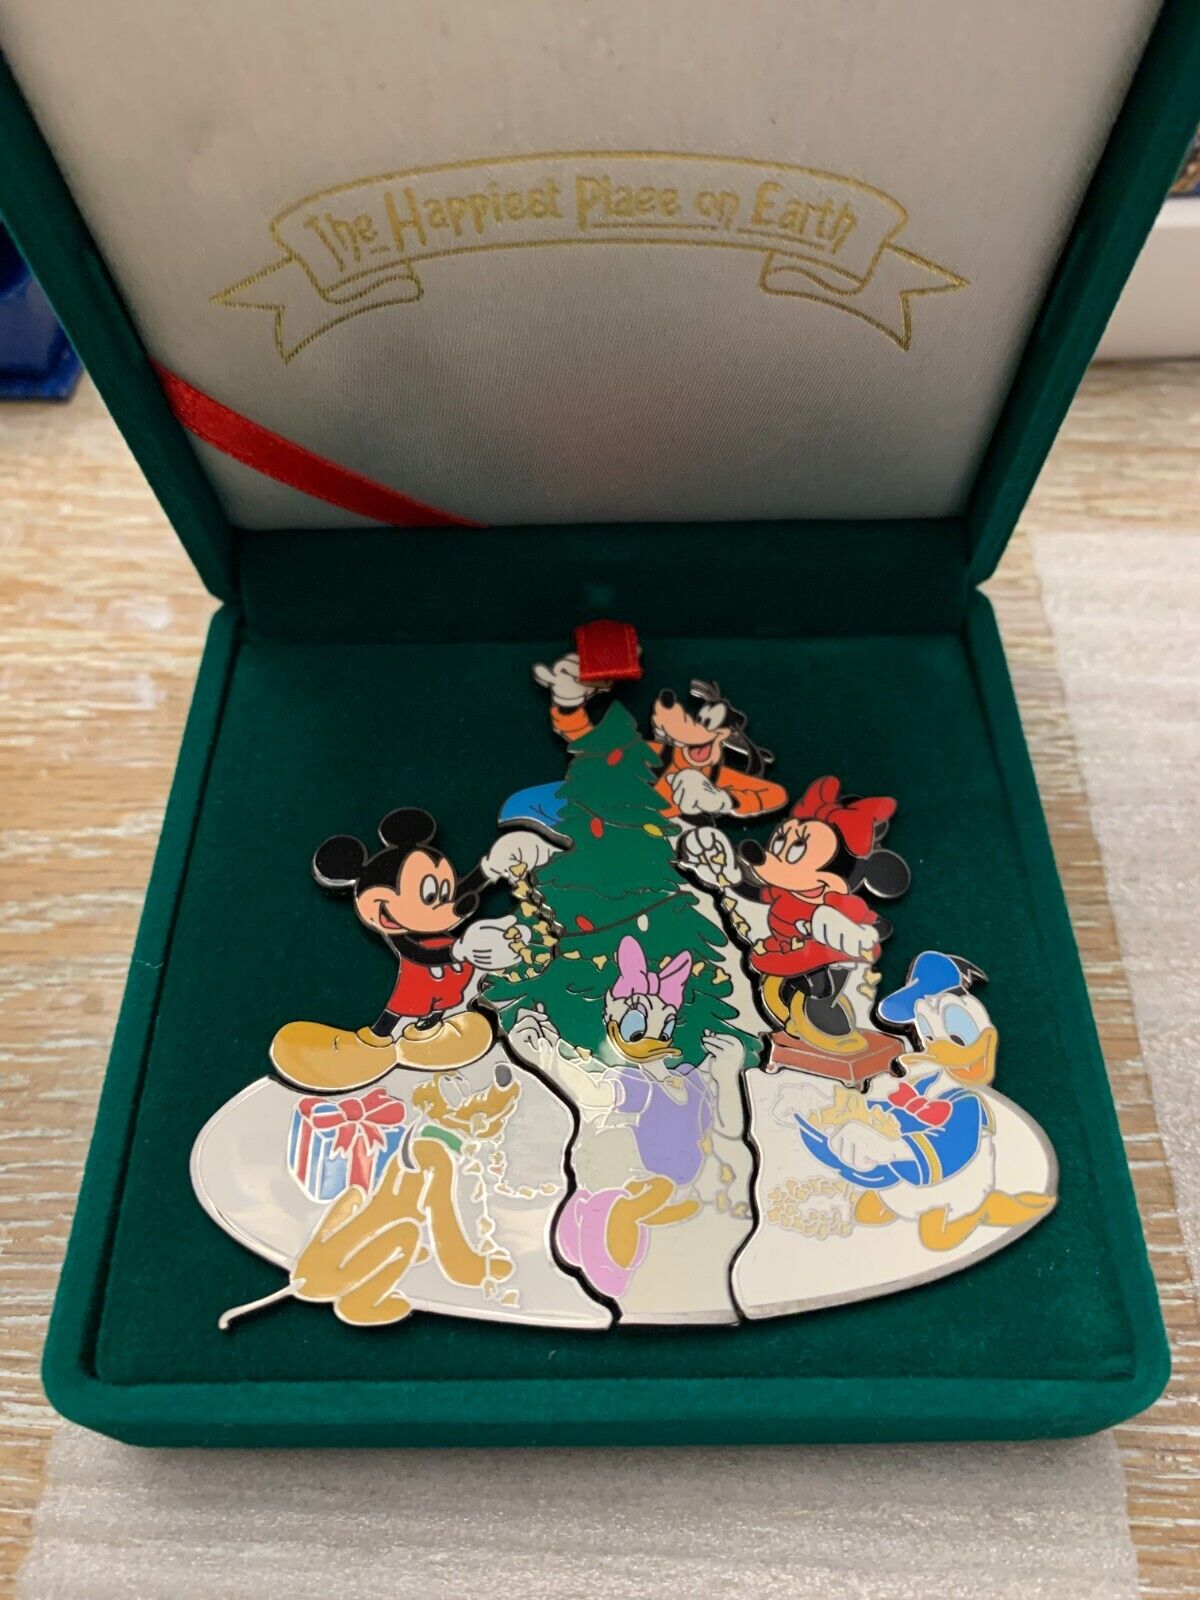 Disney Happiest Place on Earth Christmas Fab 6 pin with gift box 